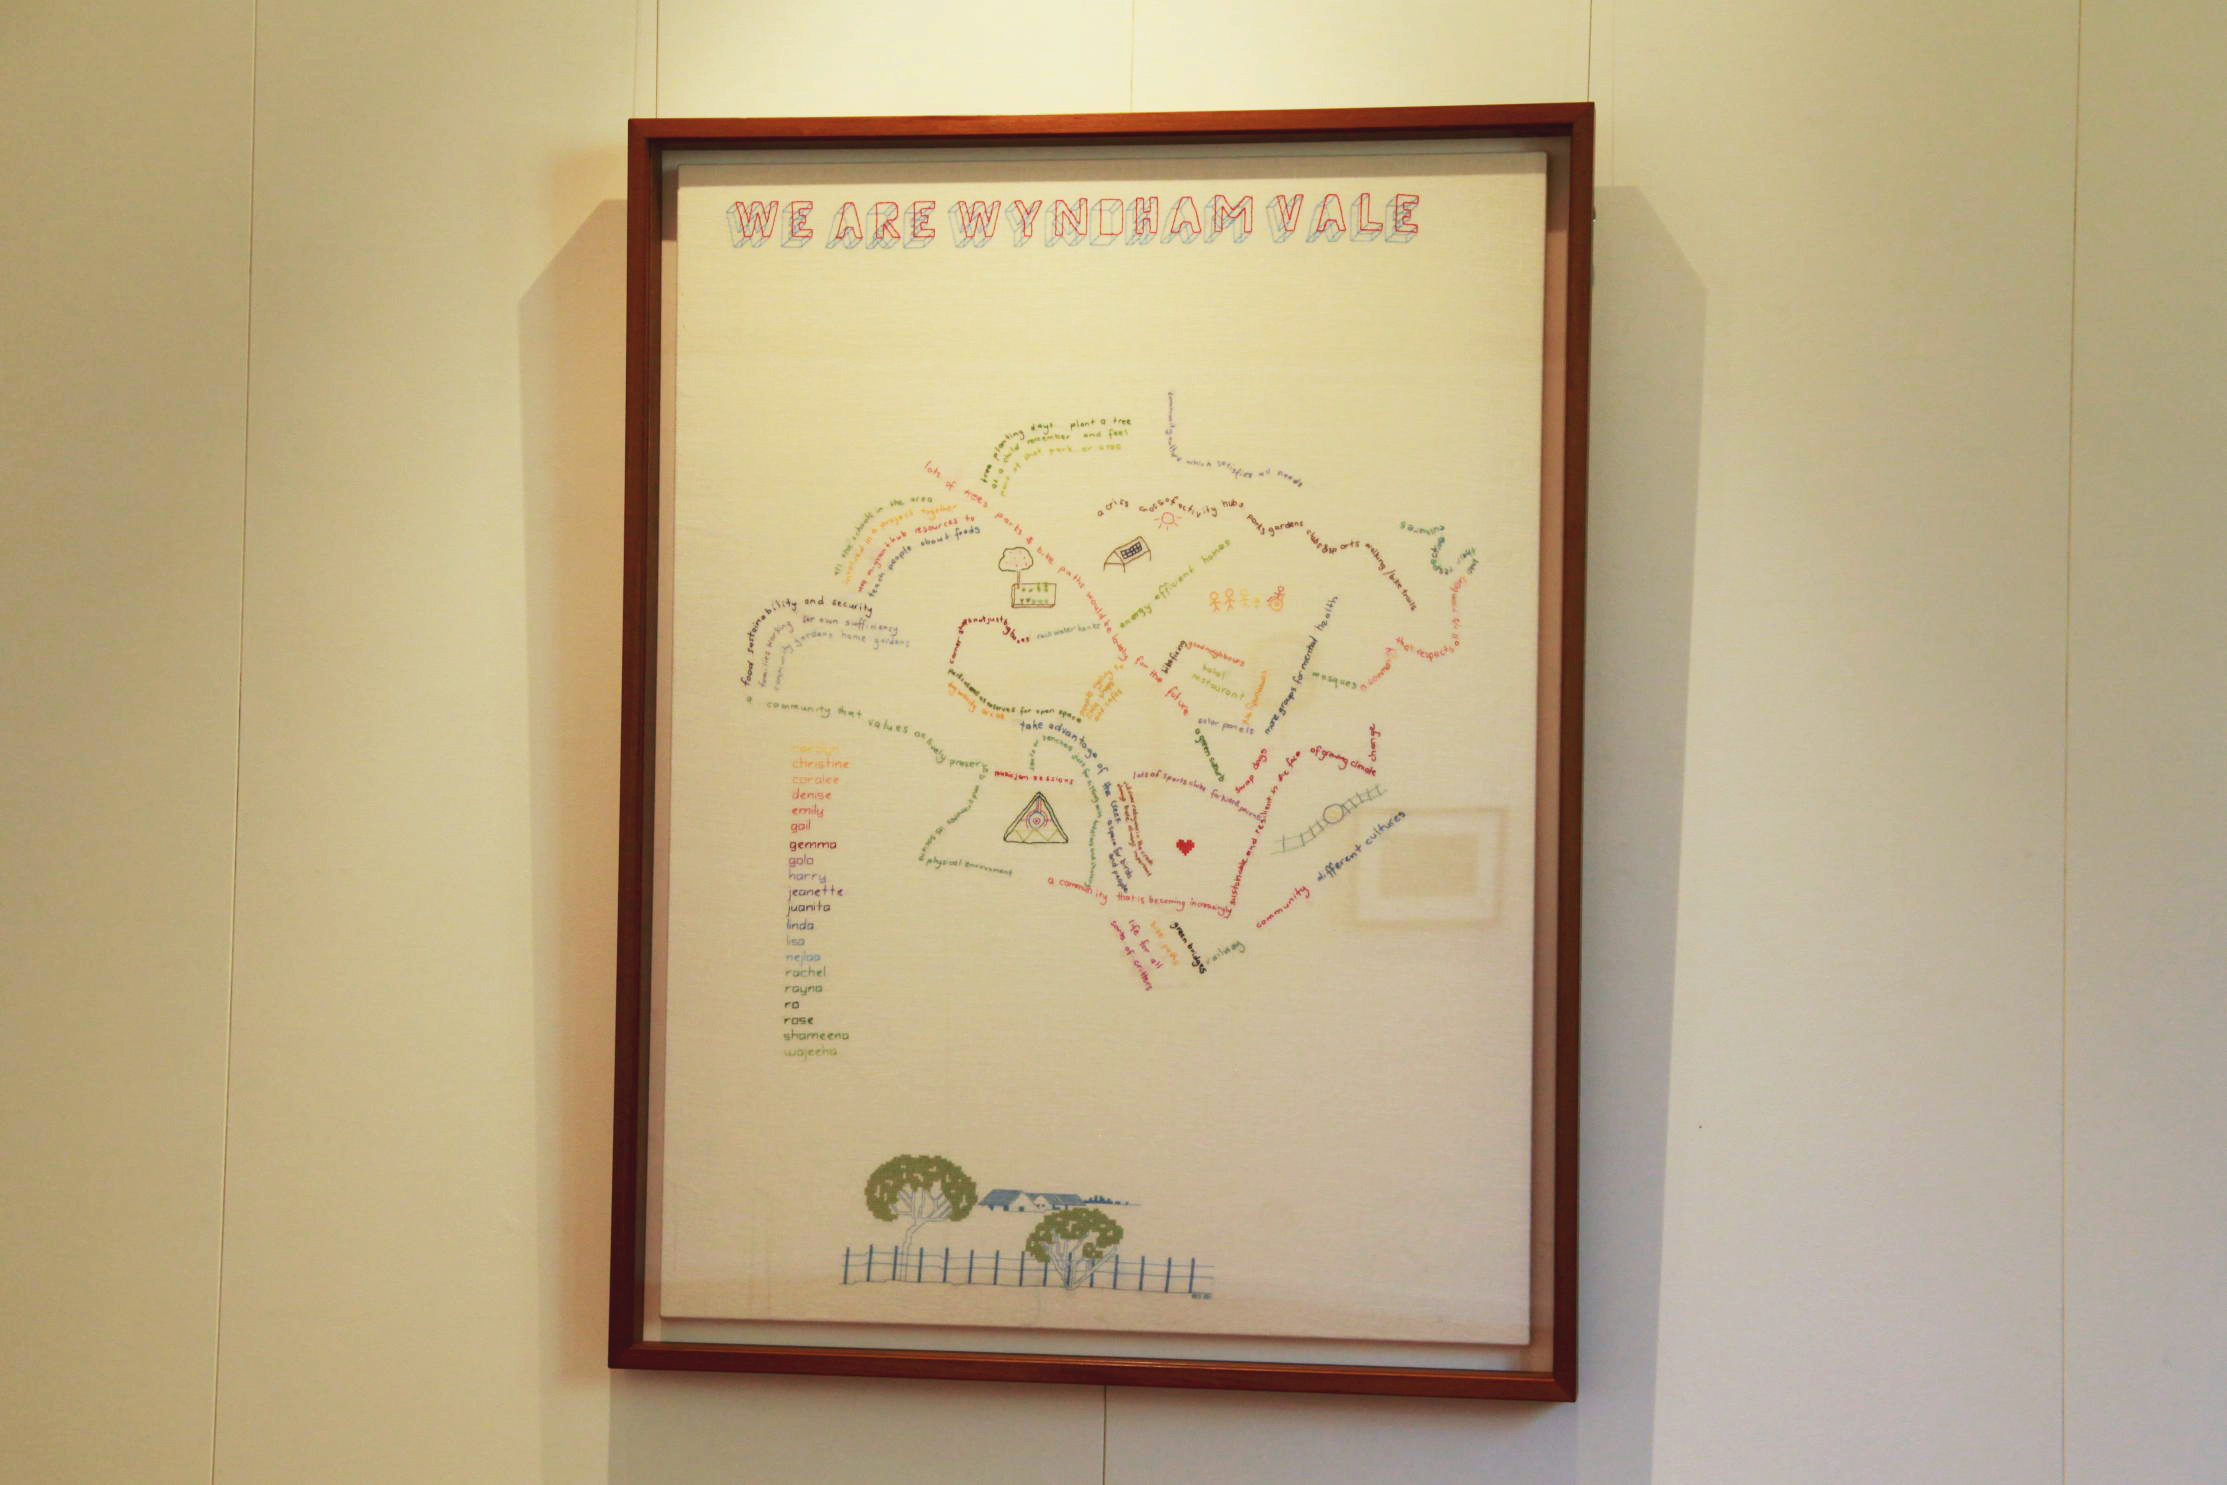 WE Are Wyndham Vale framed embroidery project